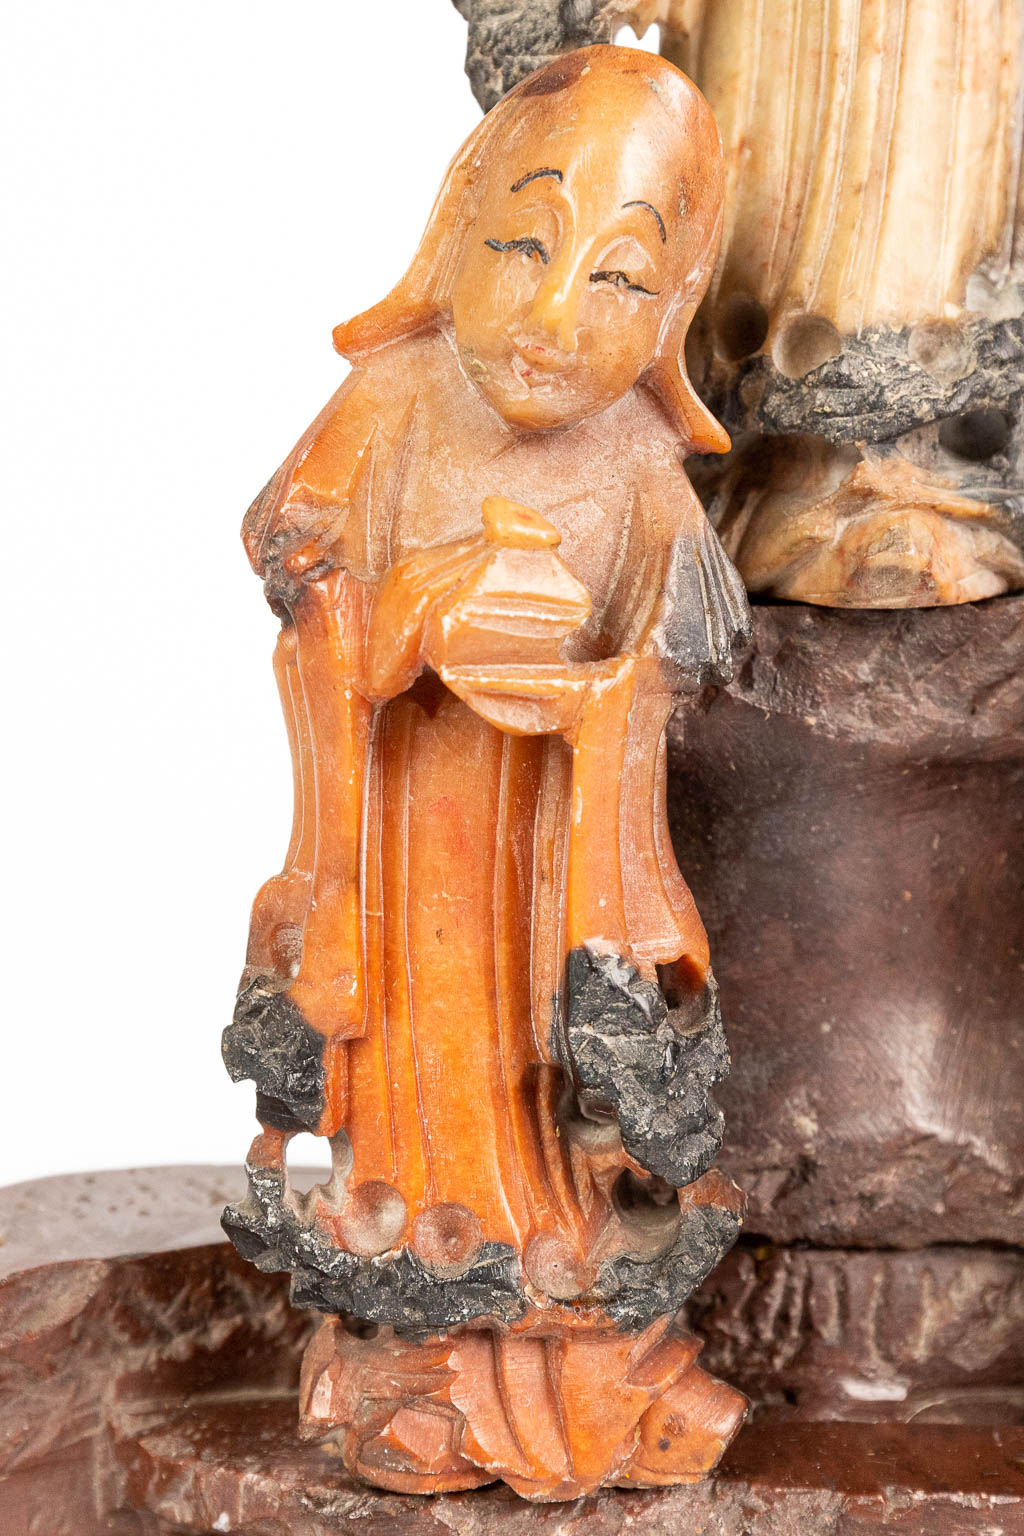 A statue of wise man, sculptured from soapstone. 